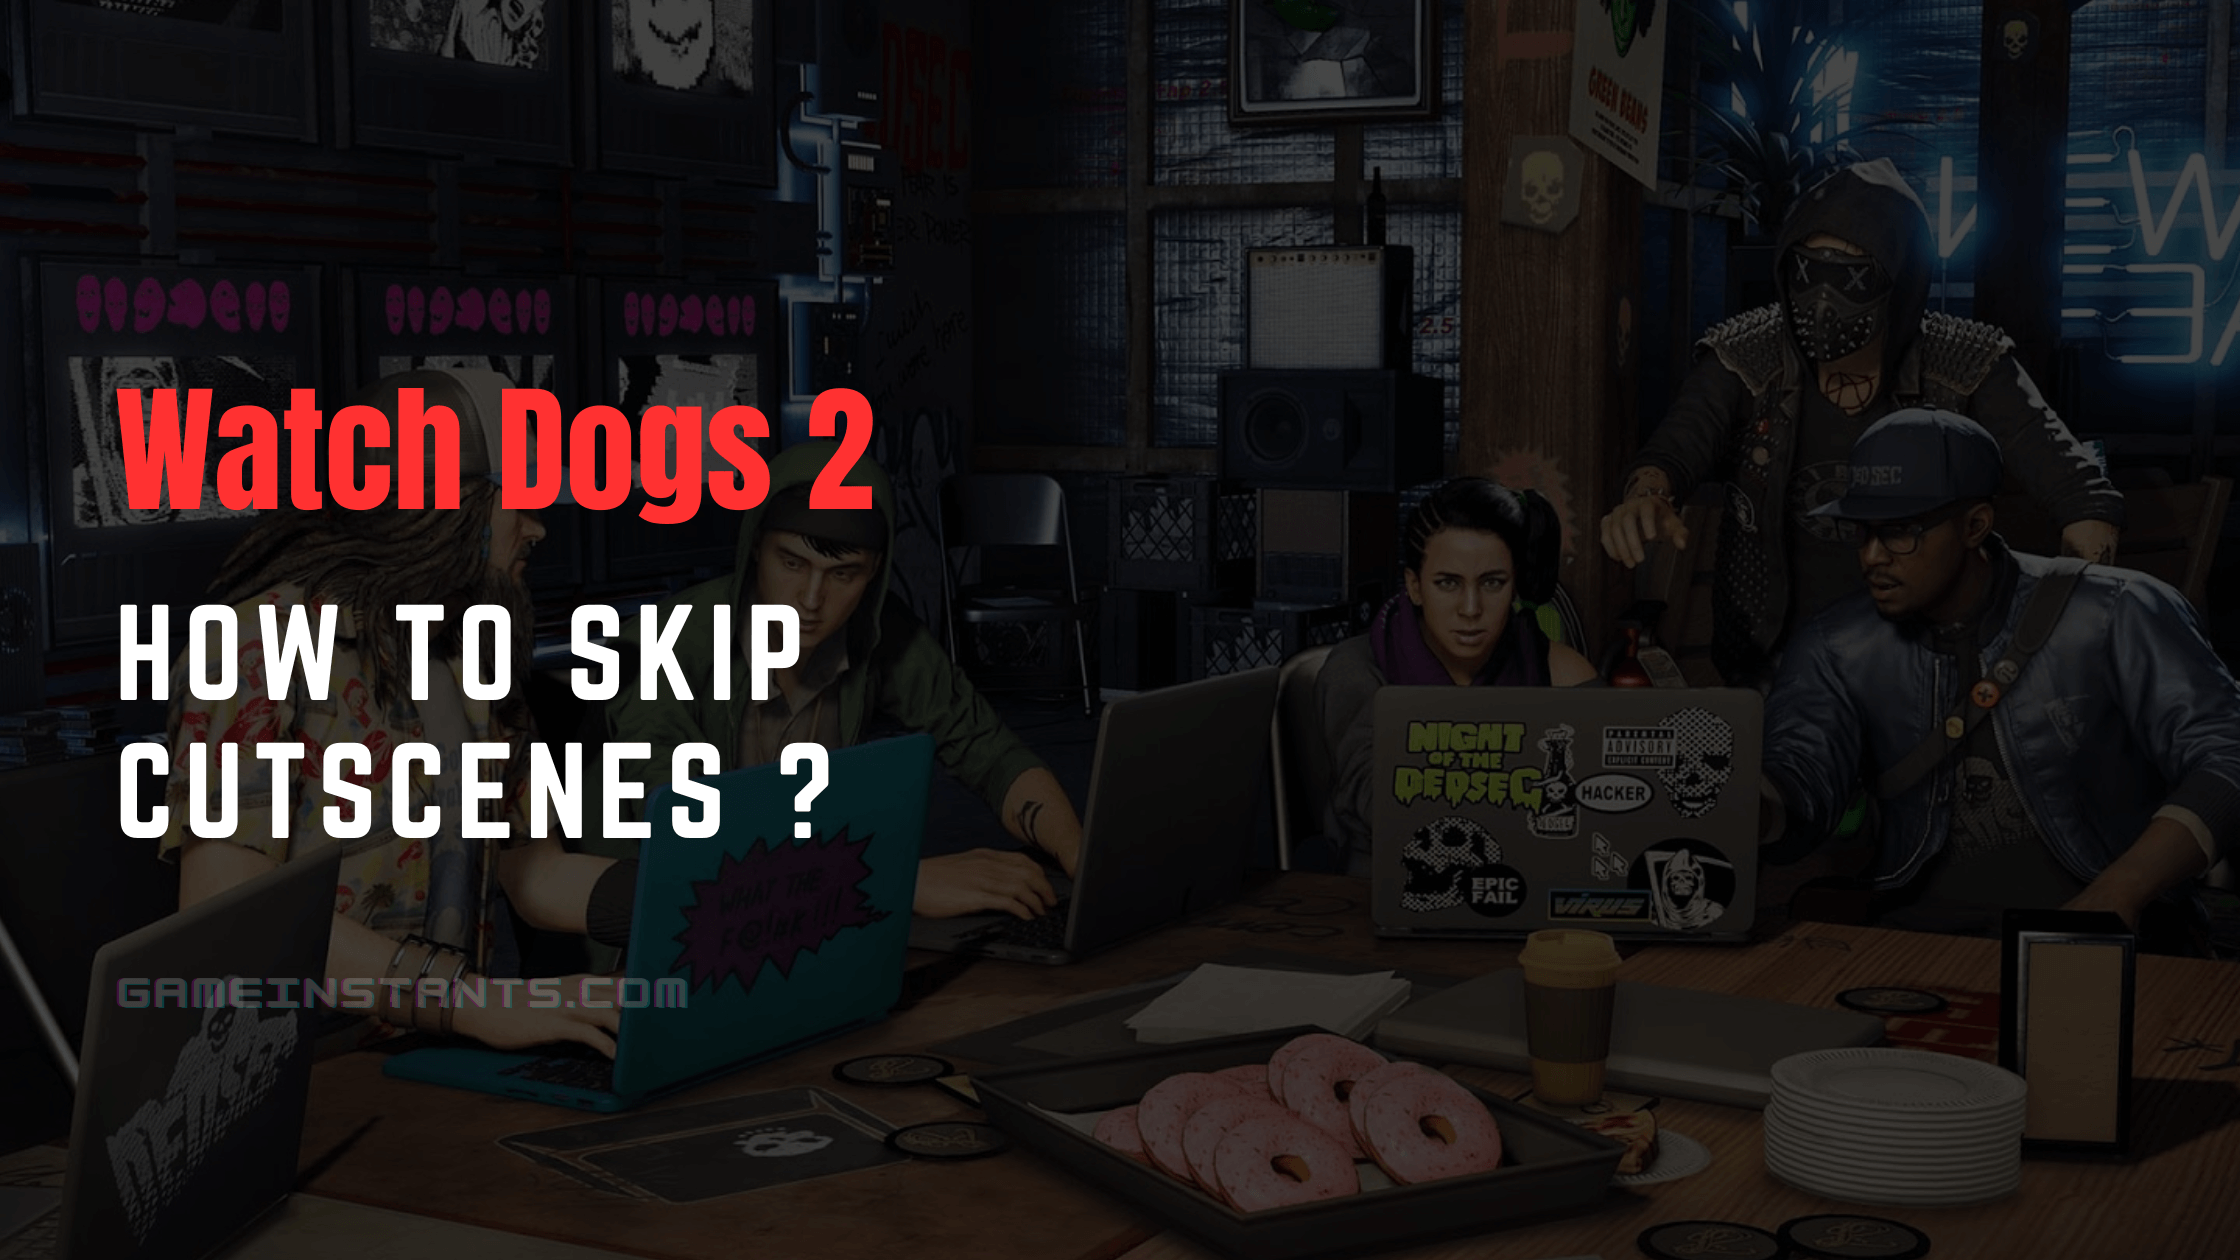 Watch Dogs 2 how to skip cutscenes